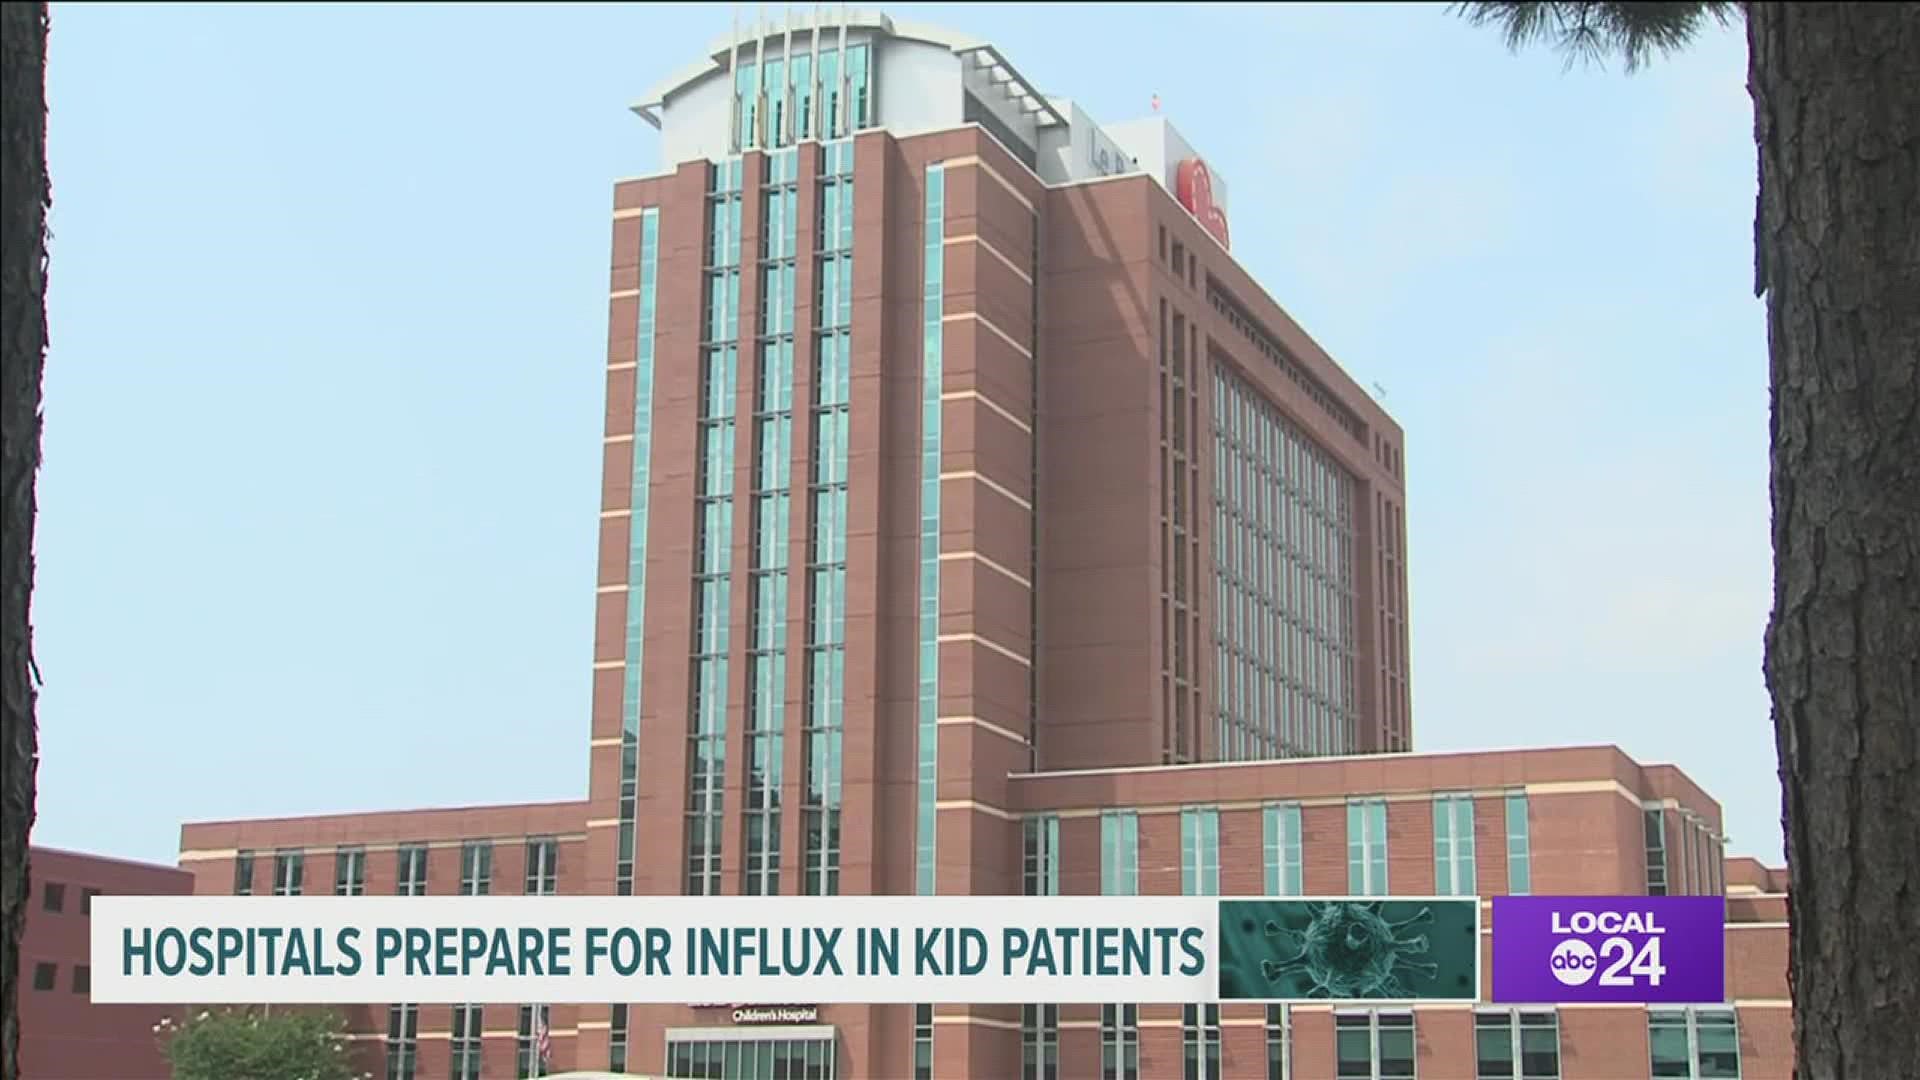 The Tennessee Health Commissioner laid out what's behind the rise and planned adjustments to better gauge available staffed beds in the state's children's hospitals.